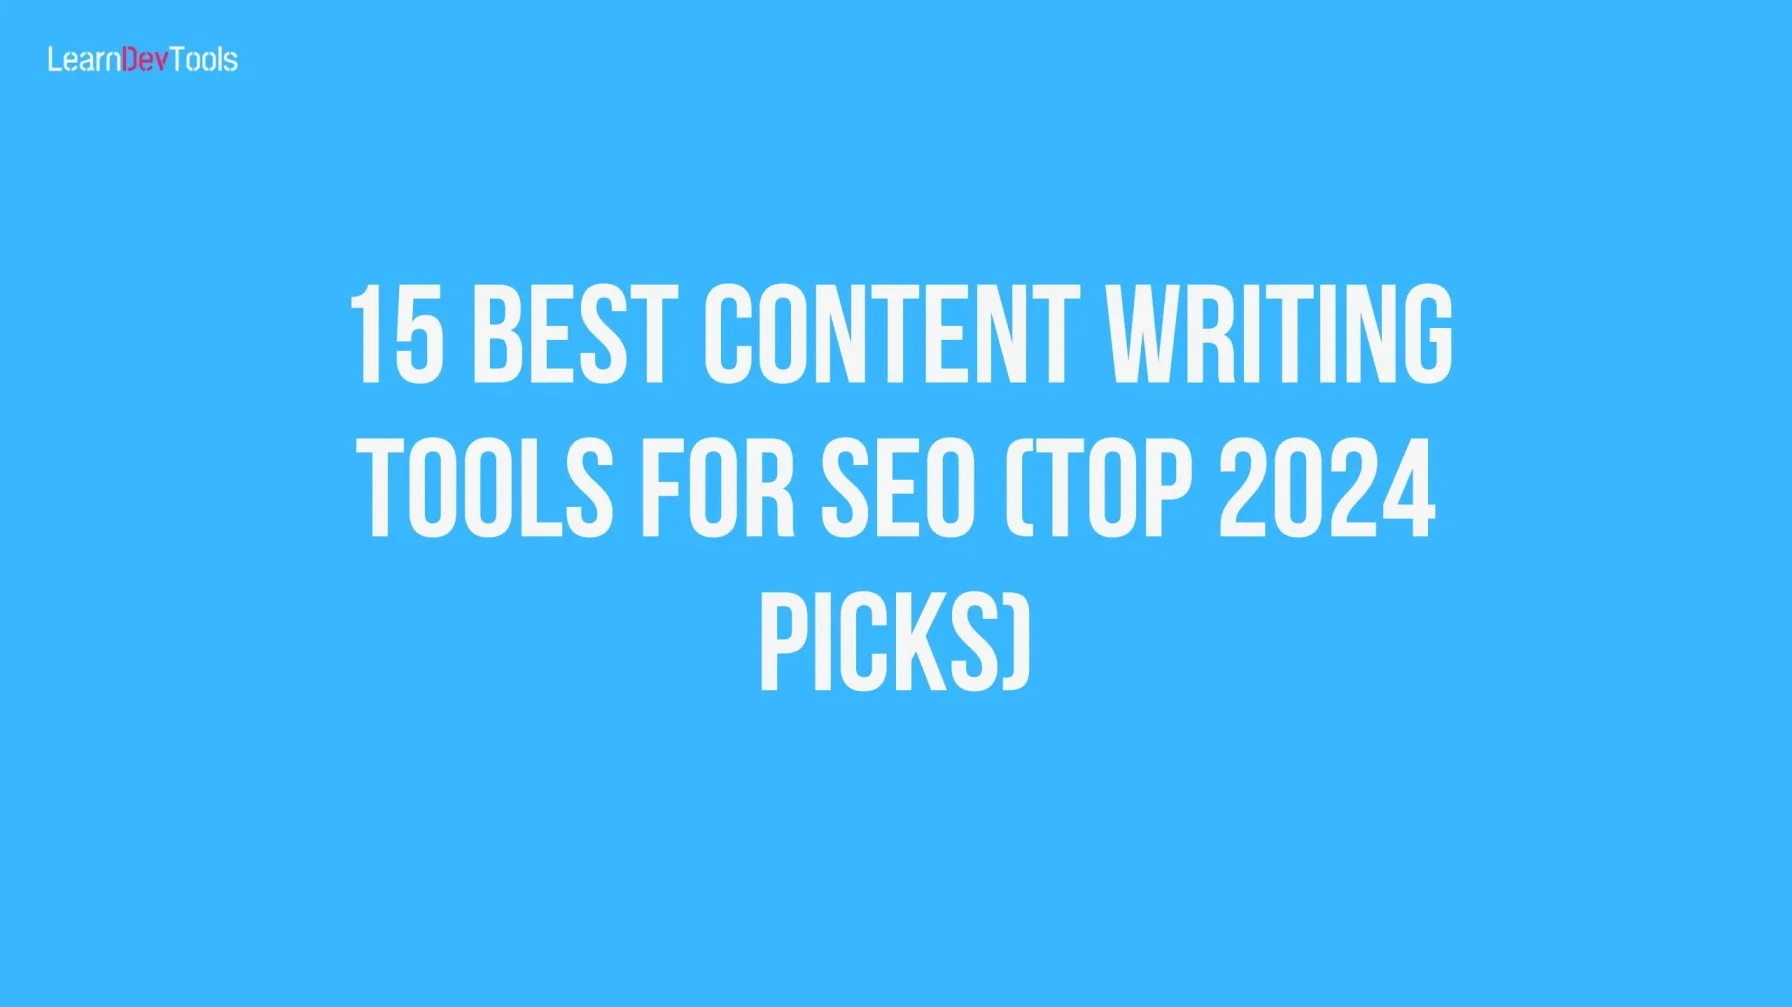 15 Best Content Writing Tools For SEO (Top 2024 Picks)